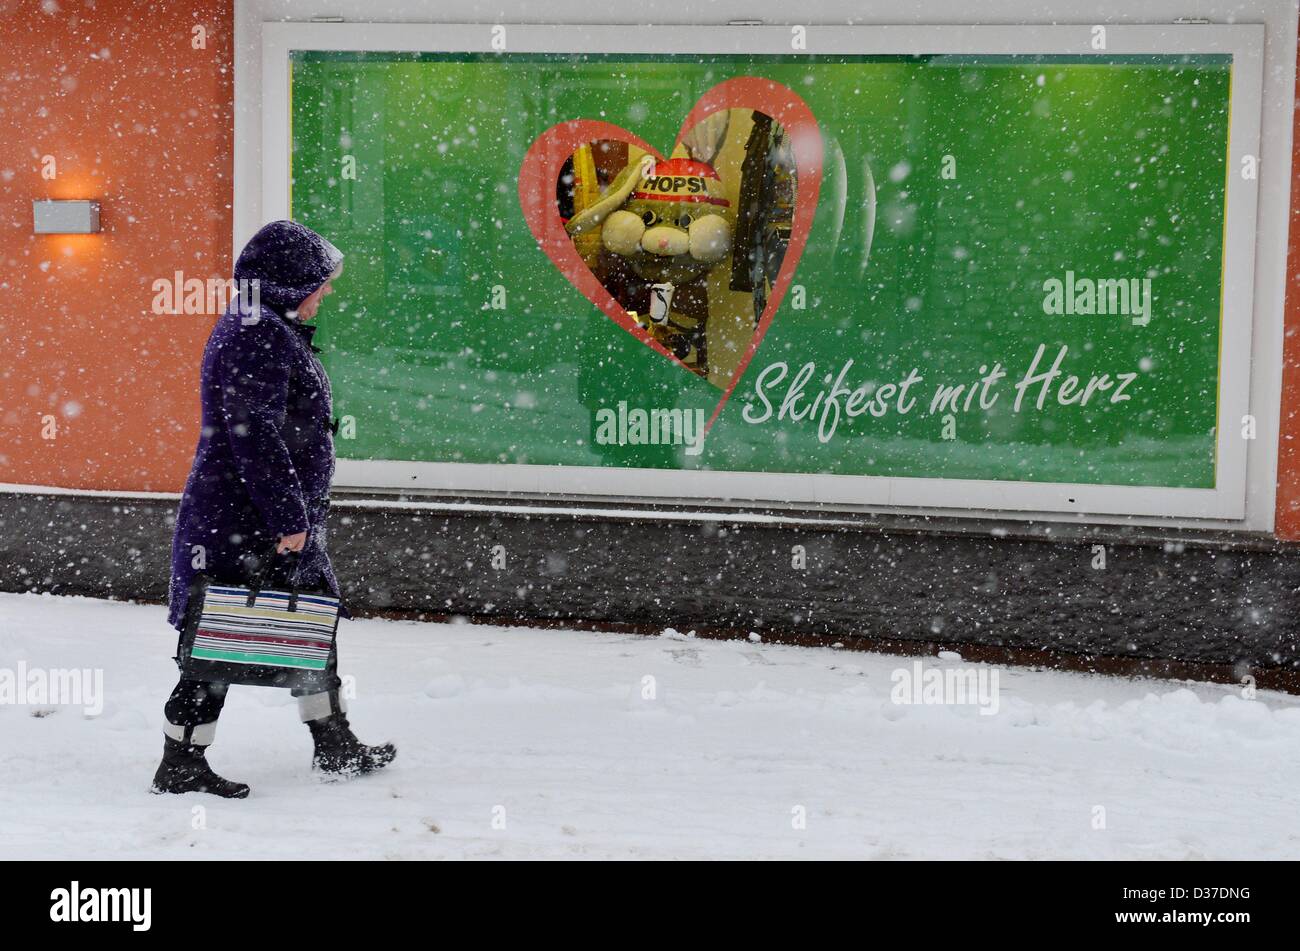 A woman passes the window of a store in which the maskot of the Ski alpin WM 'Hopsi' can be seen. Photo: Frank May Stock Photo